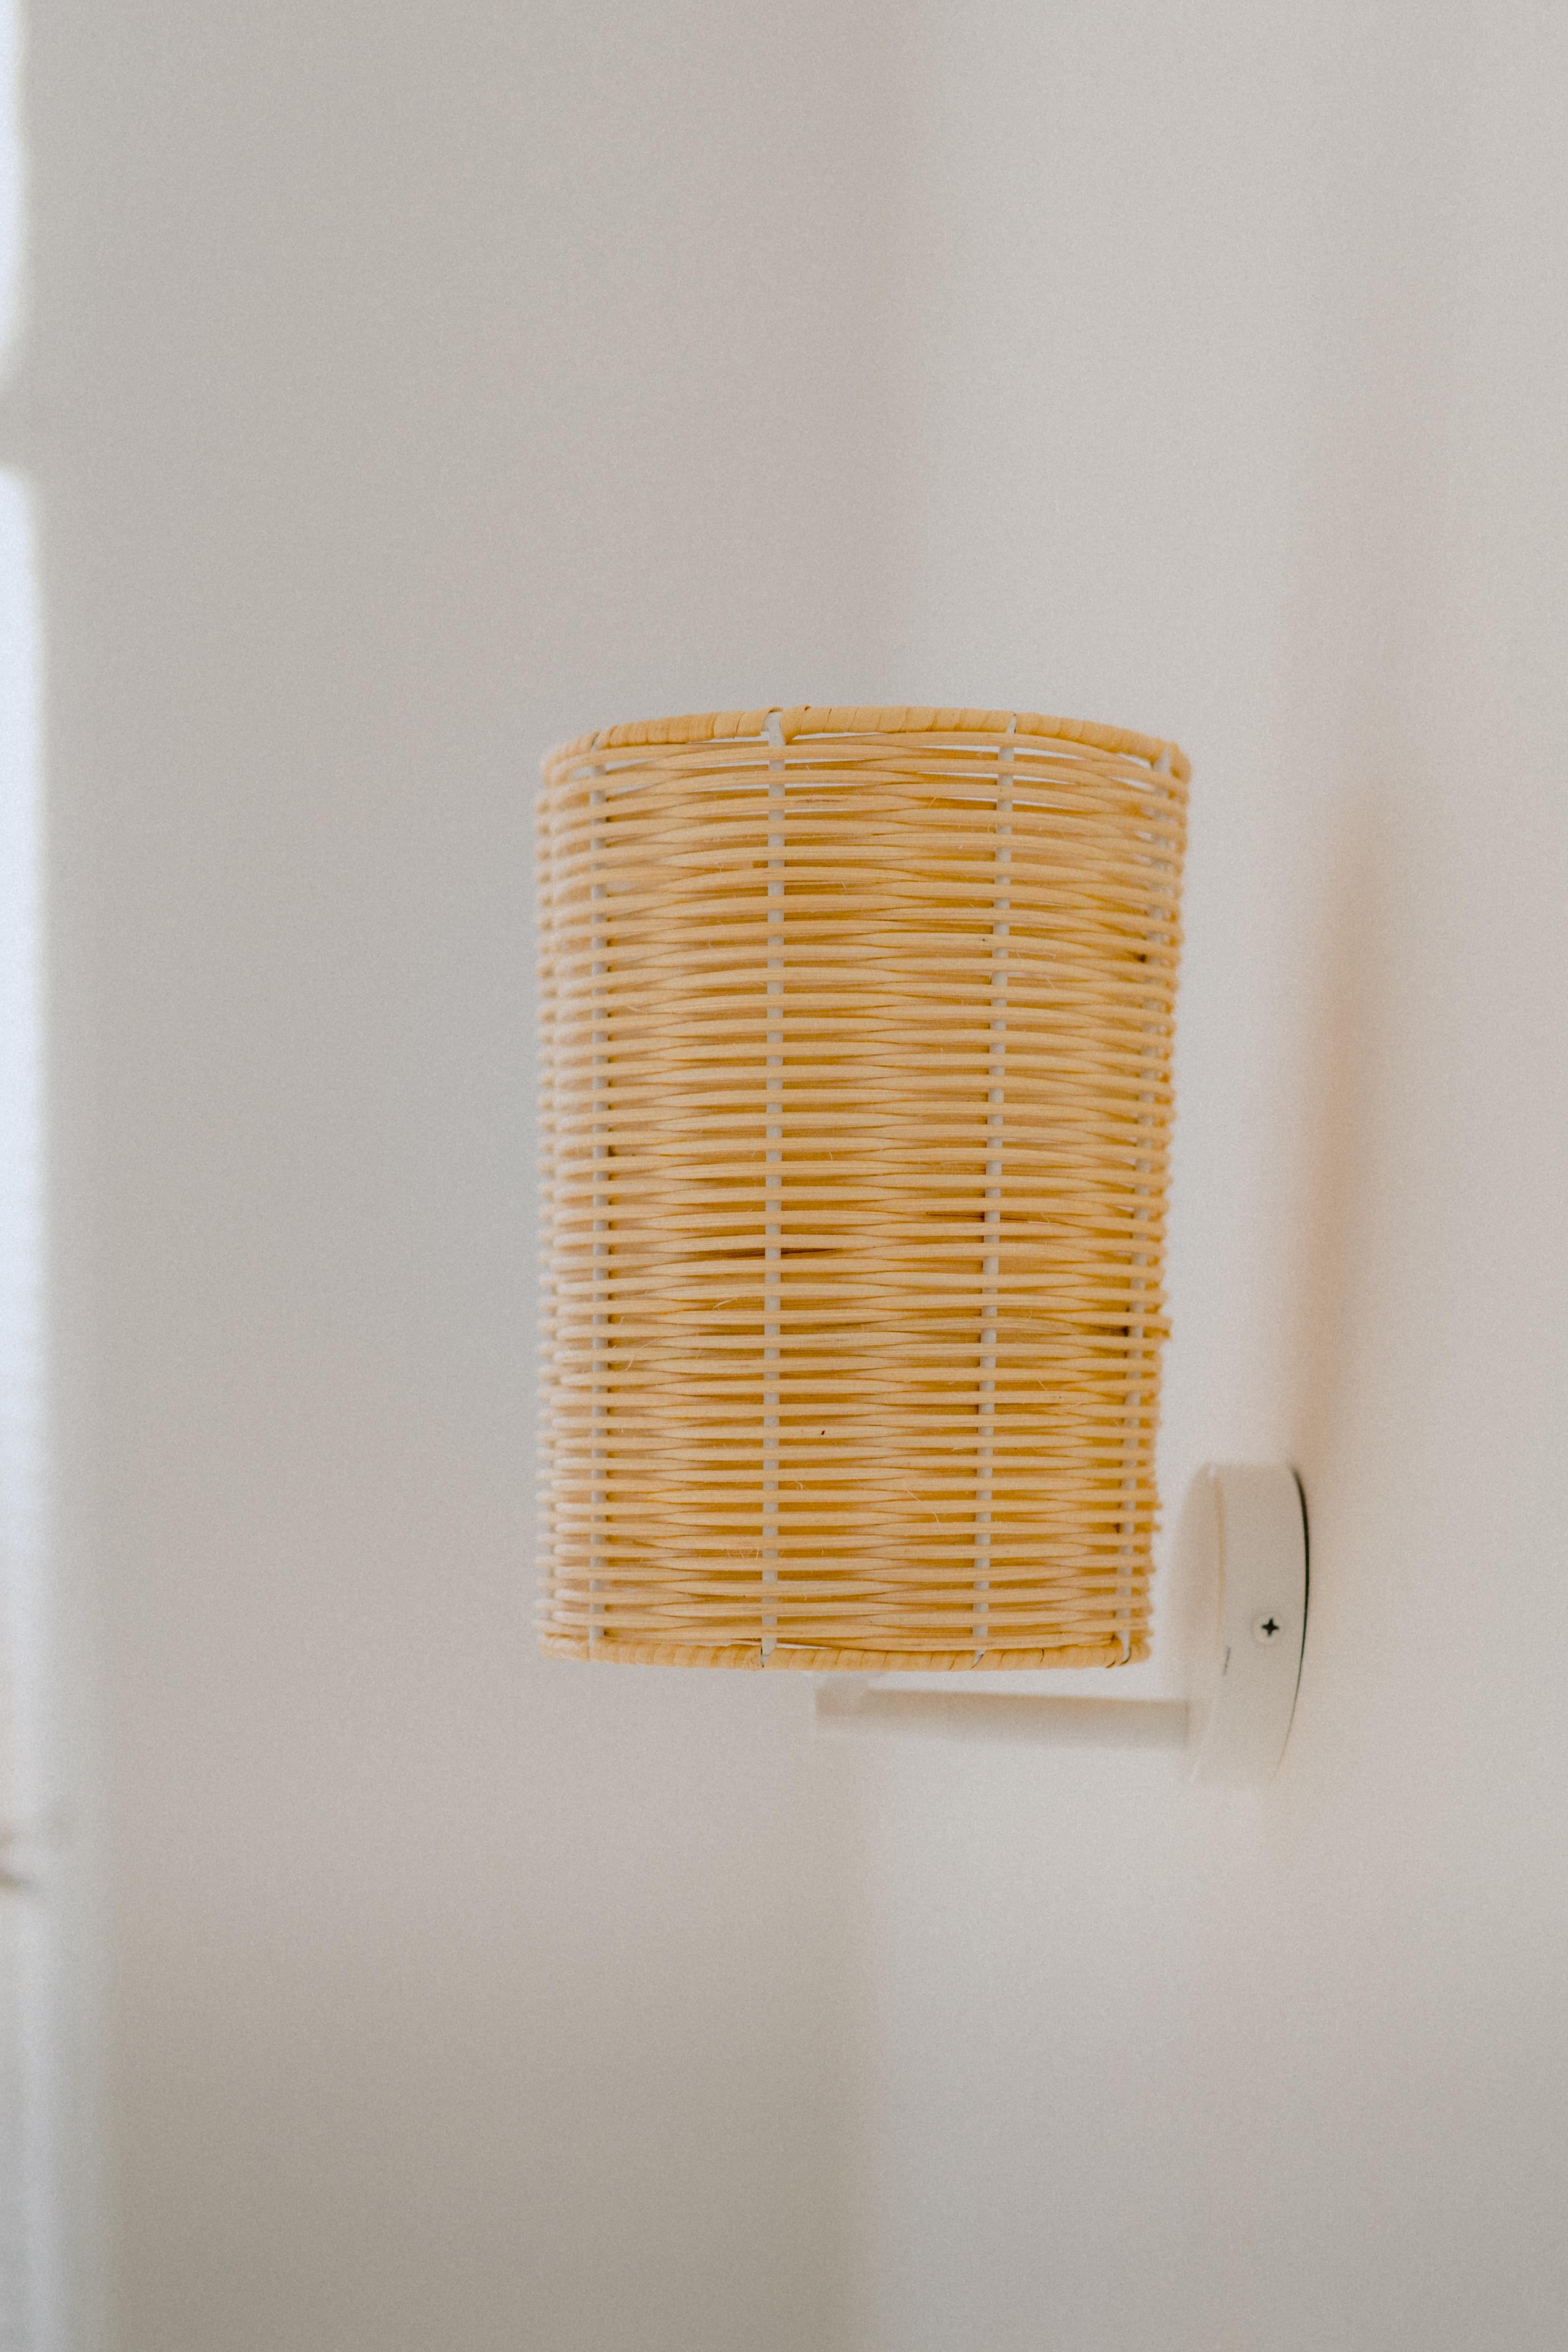 Spanish Contemporary, Handmade, Wall Lamp, Rattan Cylinder, by Mediterranean Objects For Sale